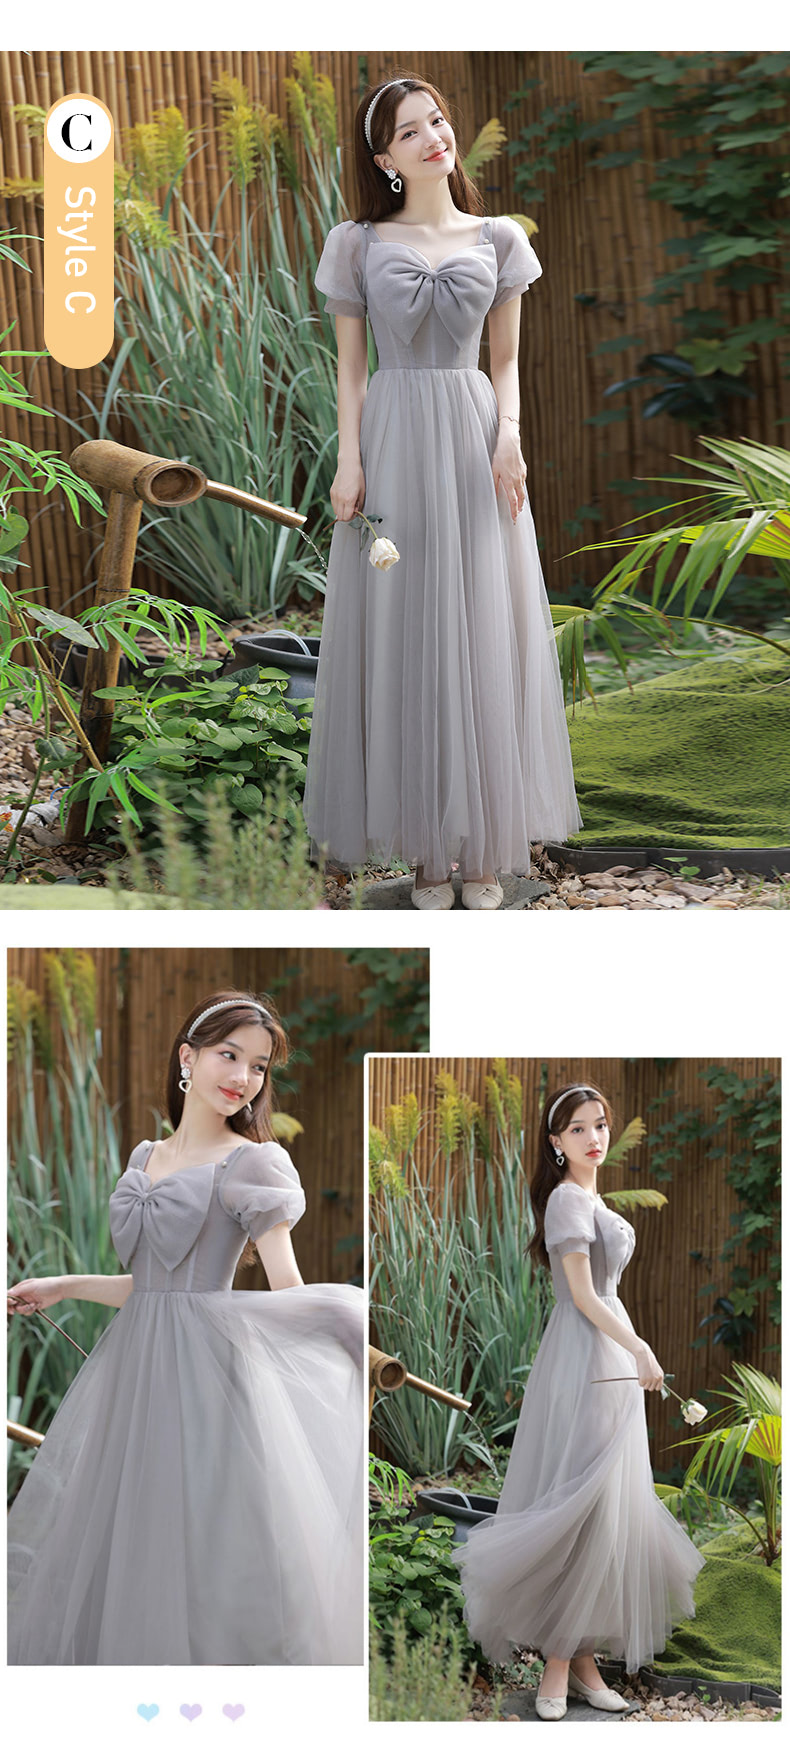 Womens-Casual-Party-Wedding-Guest-Bridesmaid-Maxi-Dress-Gown19.jpg